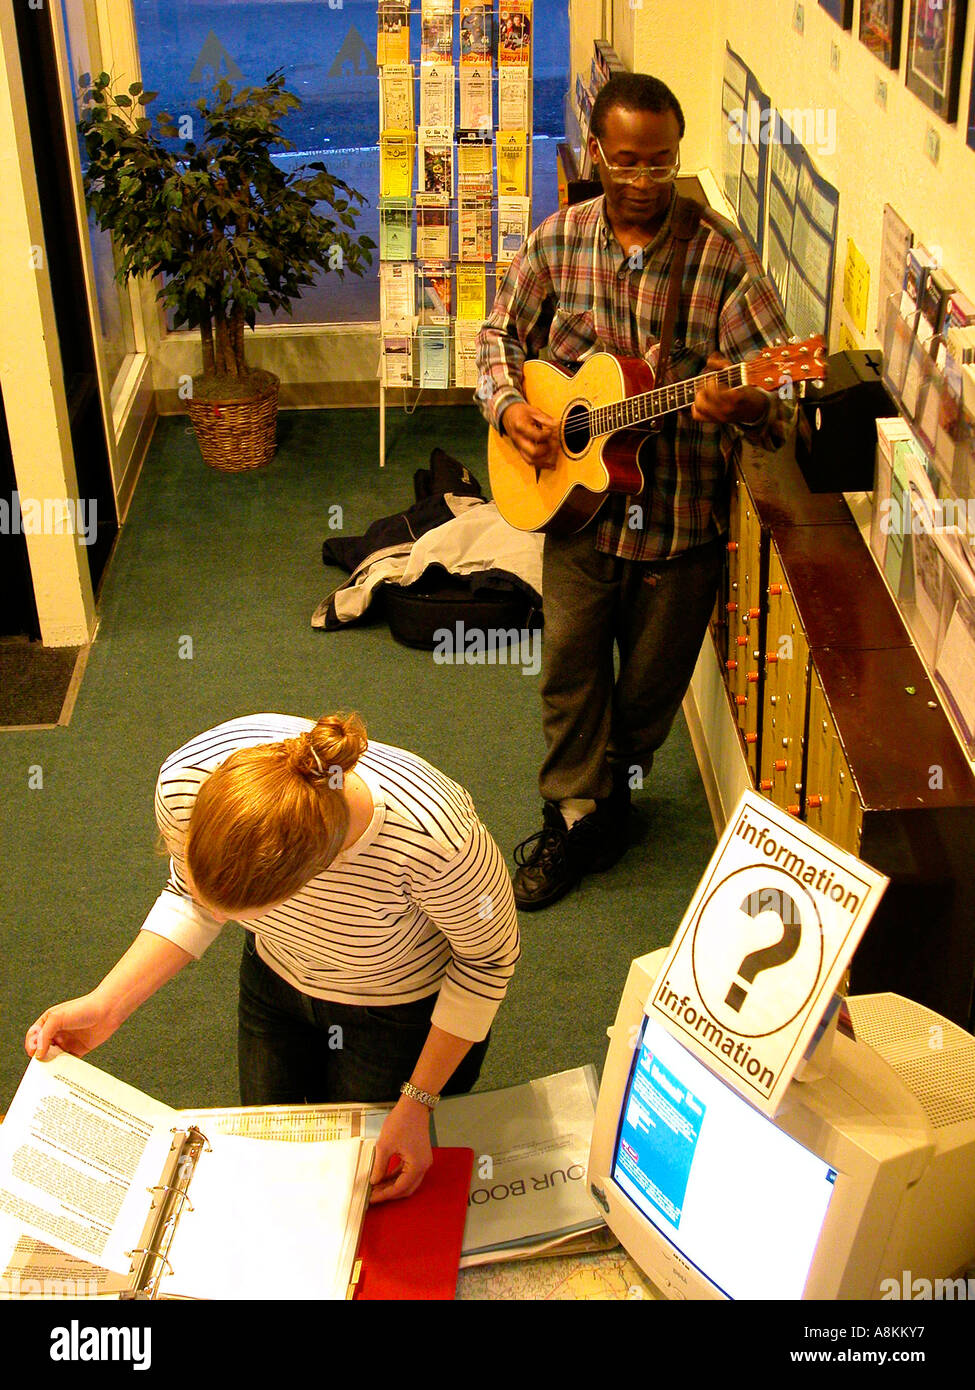 Student traveler getting information and a African American man playing a guitar at Mason Street youth hostel in San Francisco California Stock Photo